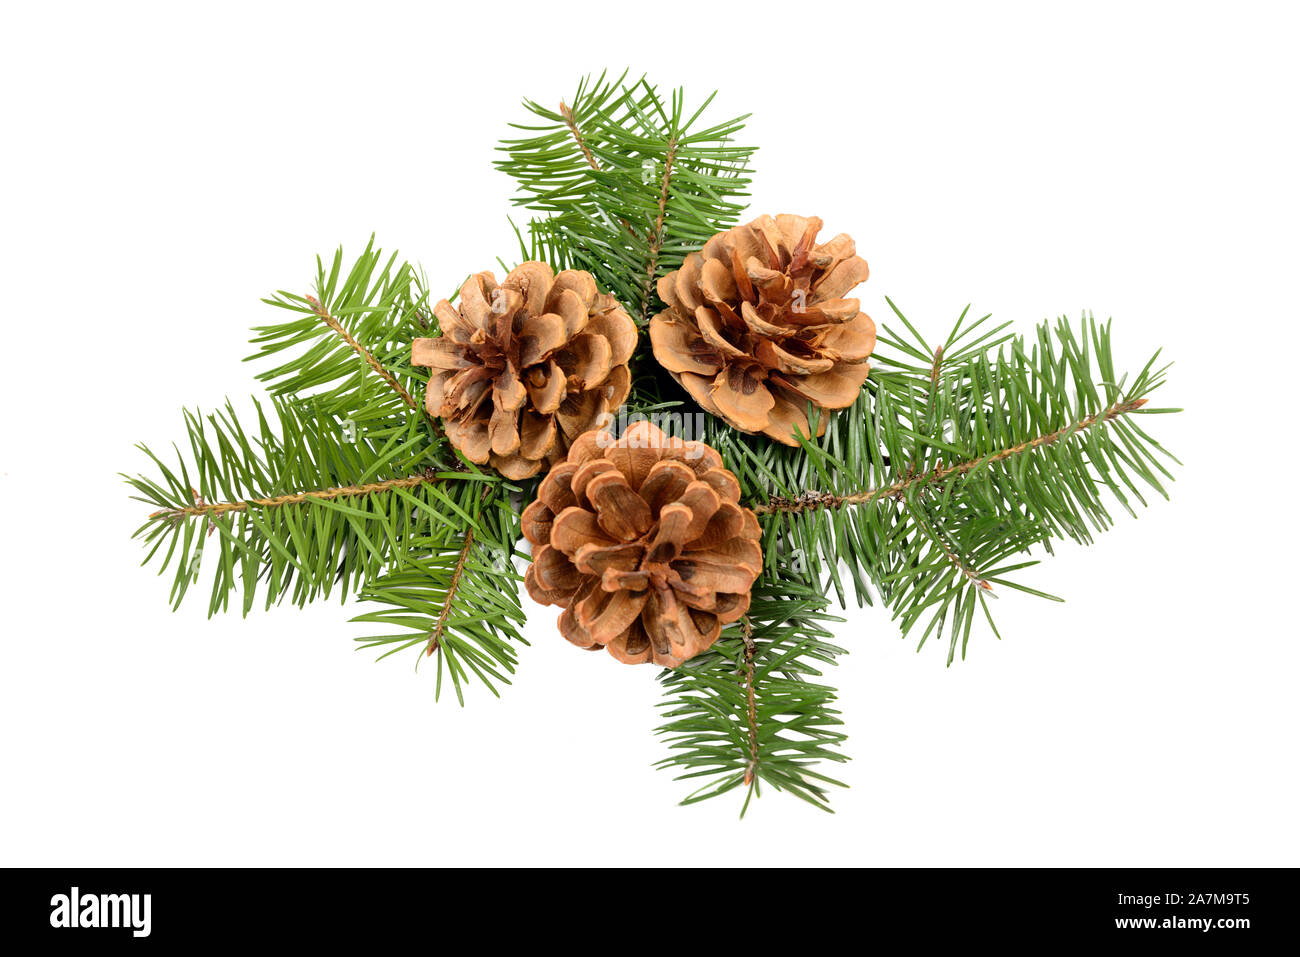 Pine cones with Christmas tree branch isolated on a white background. Holiday ornament design element Stock Photo